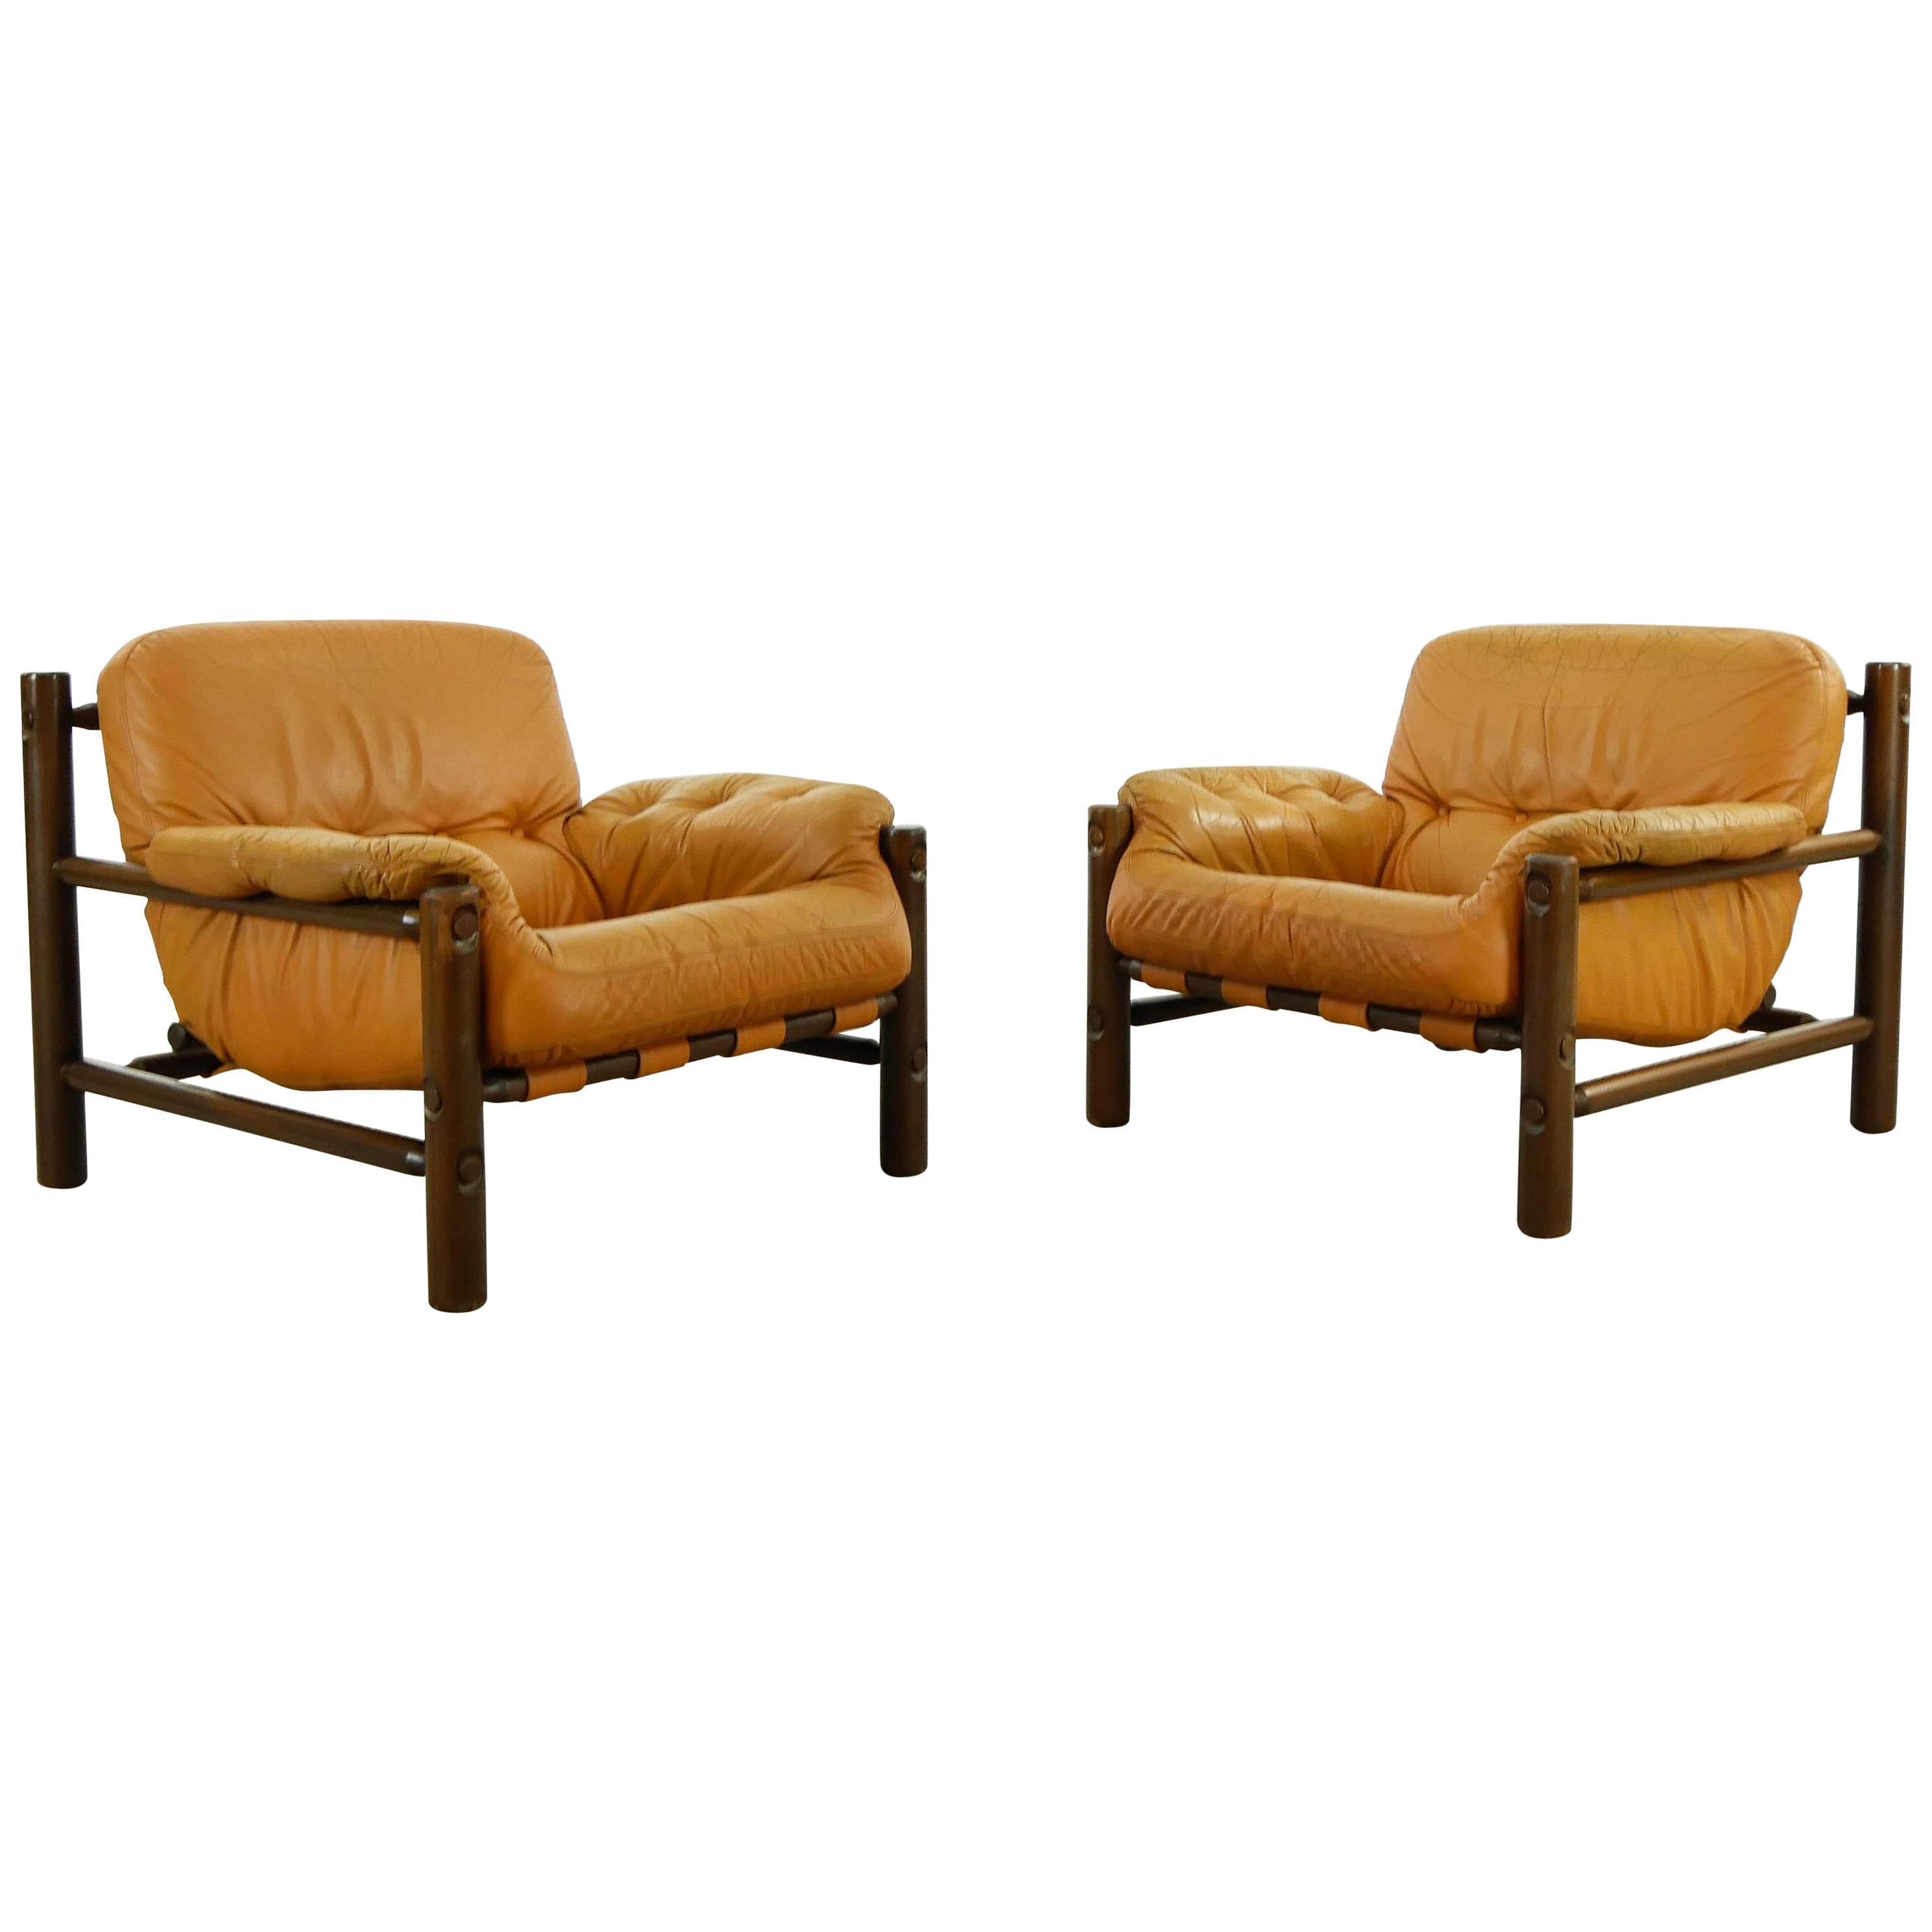 Pair of Brazilian Lounge Chairs in Cognac Leather, 1970s